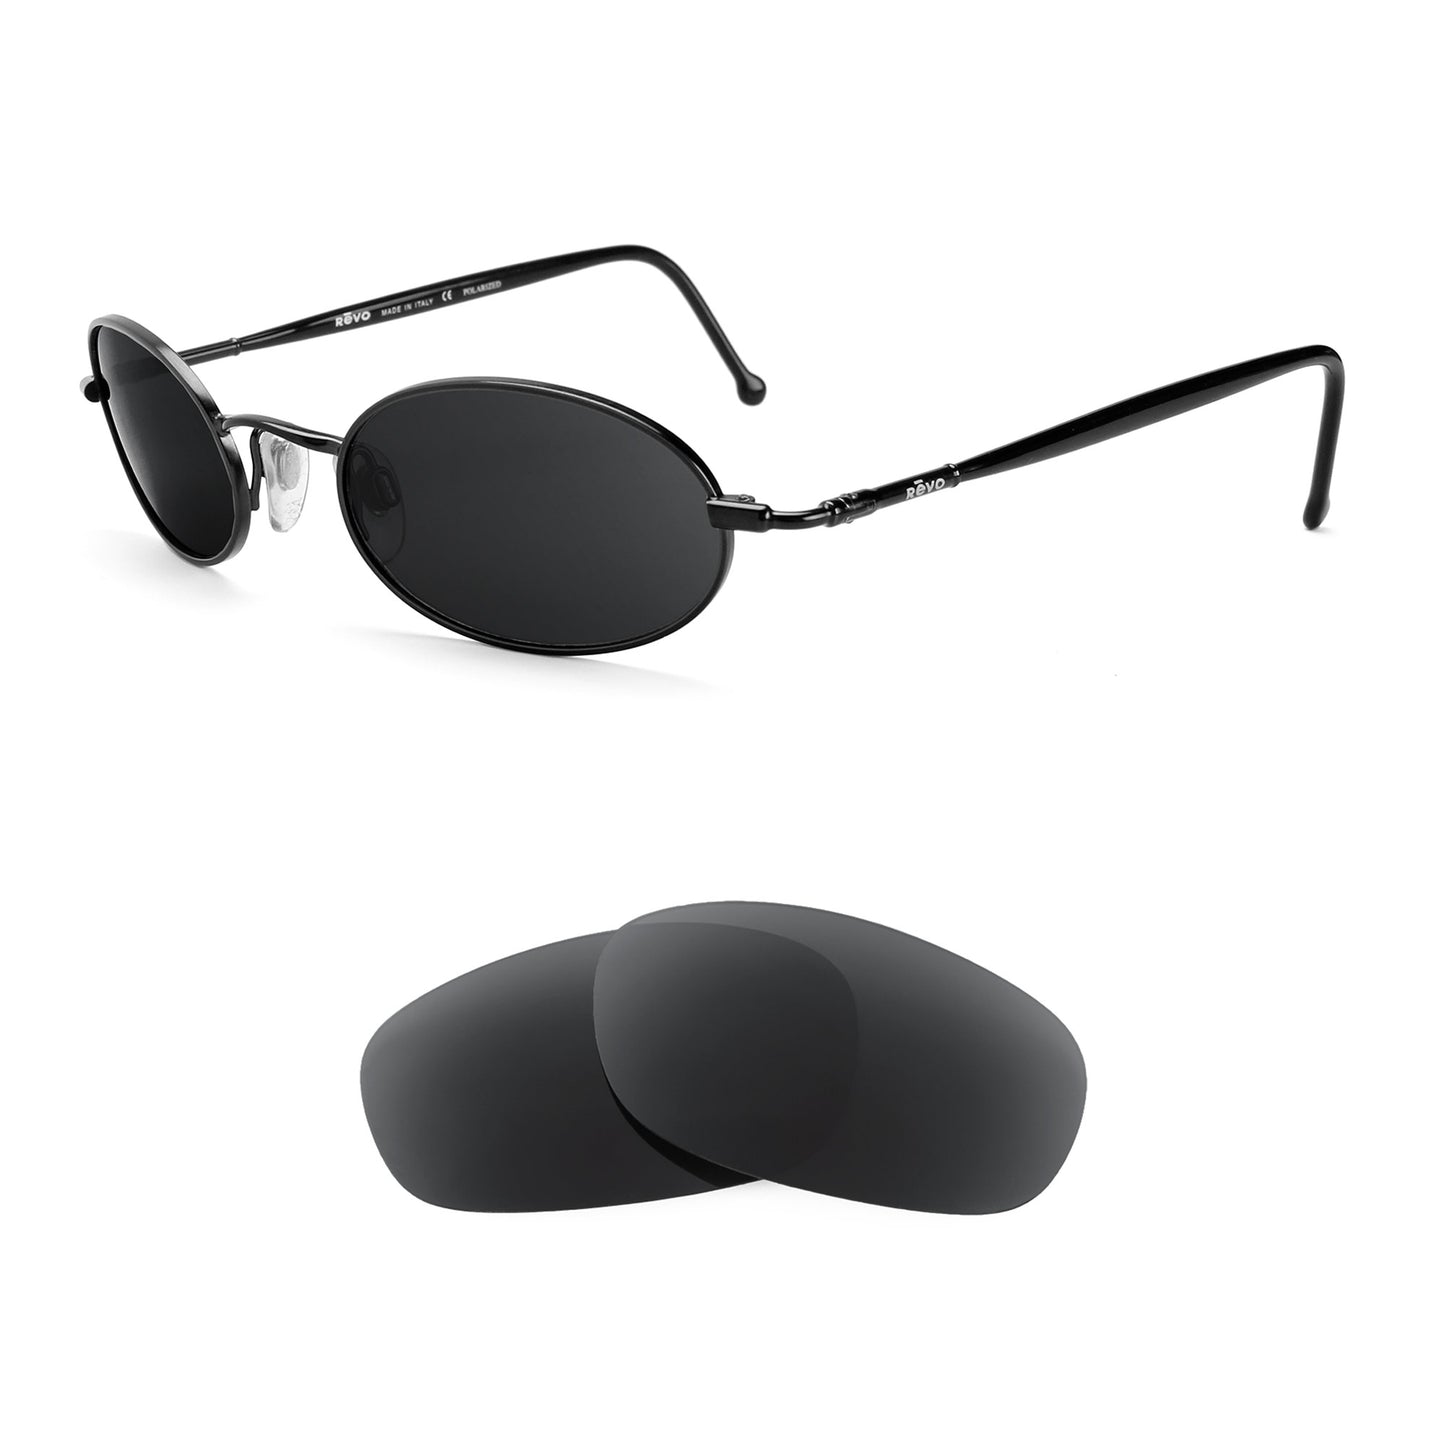 Revo 3018 sunglasses with replacement lenses